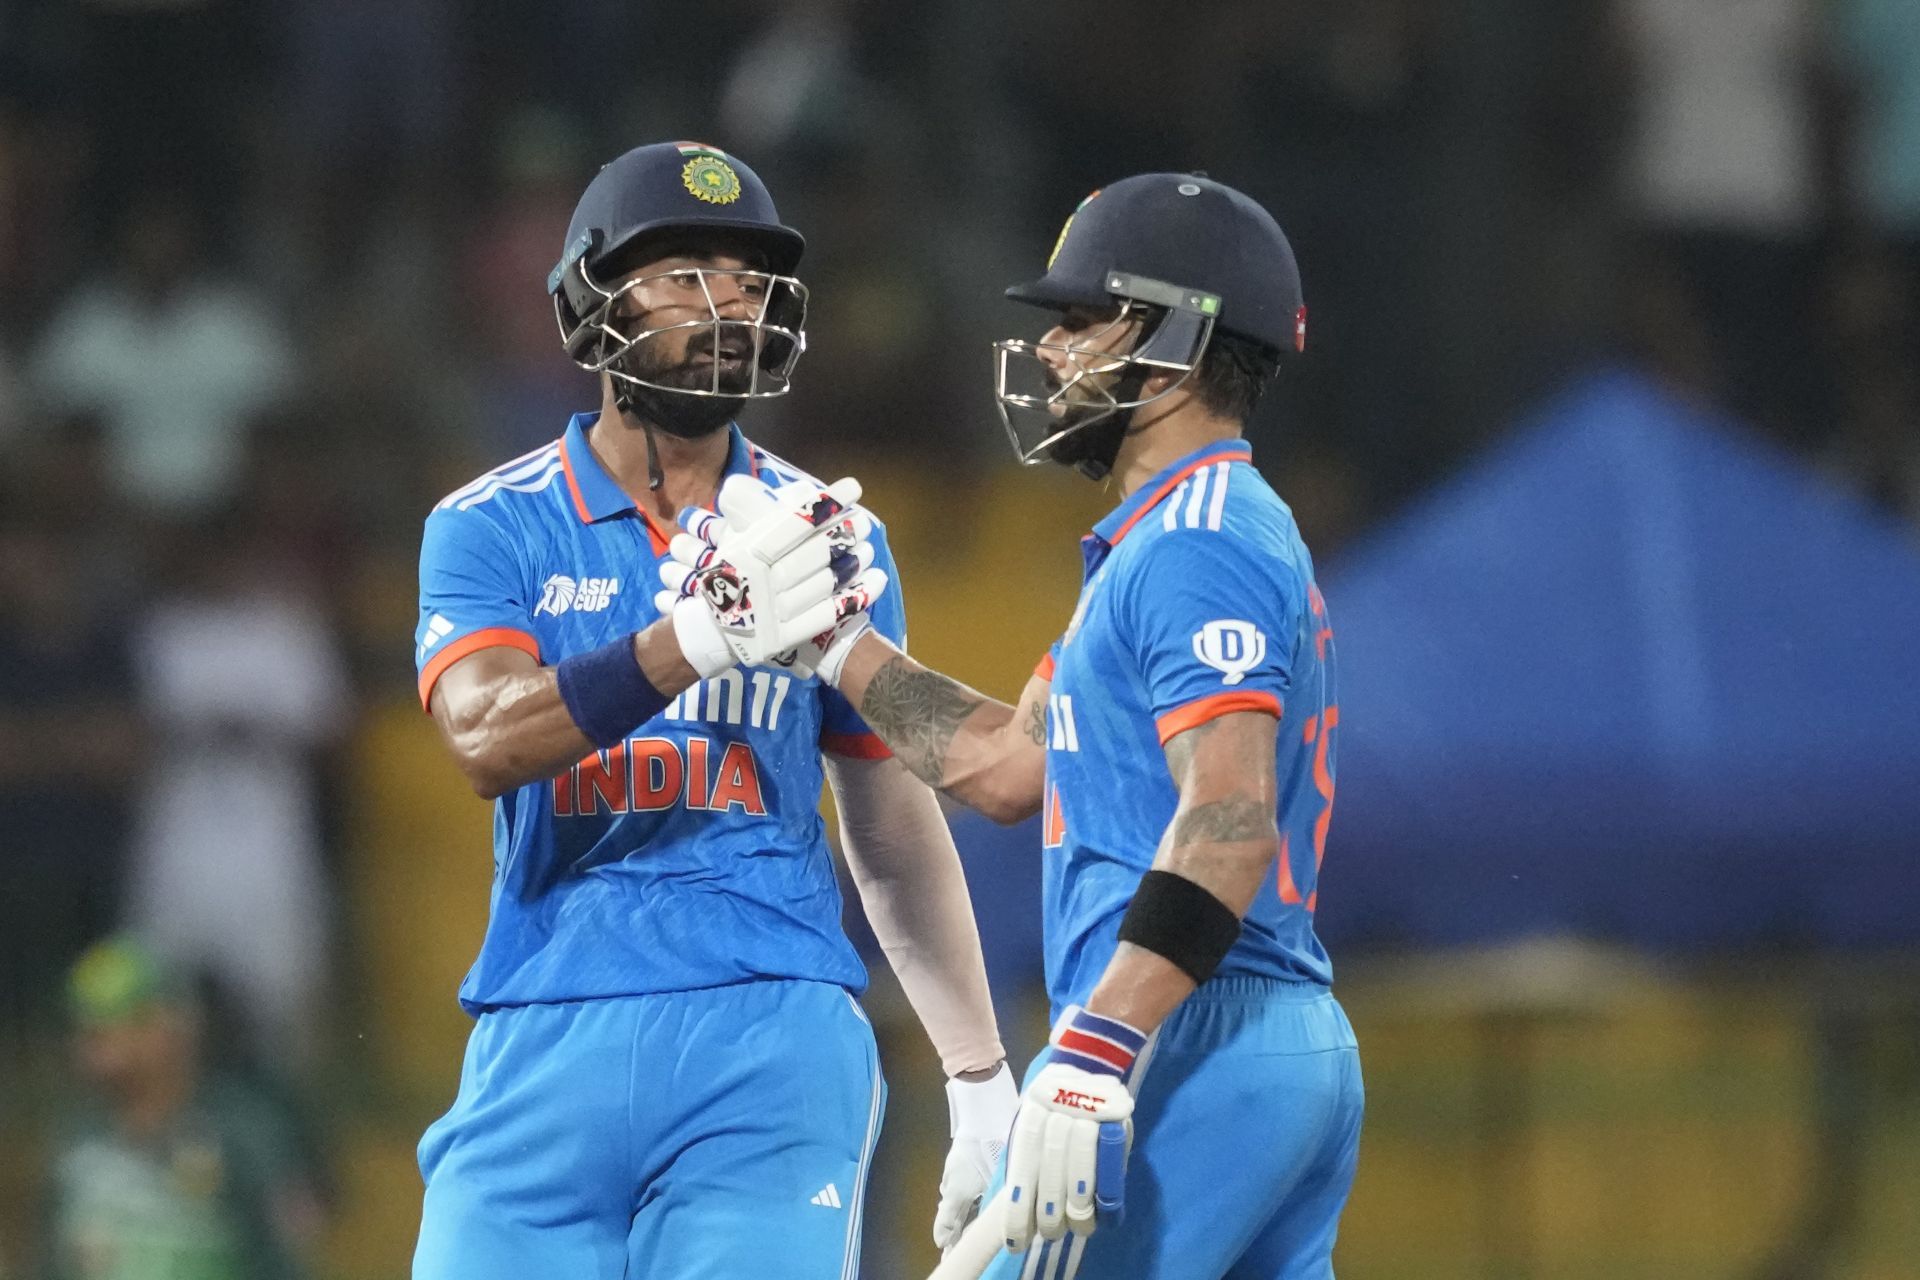 Virat Kohli (right) and KL Rahul build on the solid platform laid by the openers. Resuming at their overnight scores of 8 and 17 respectively, the duo went on to add an unbroken 233 runs for the third wicket as India posted an imposing 356/2 on the board. (Pic: AP Photo/Eranga Jayawardena)